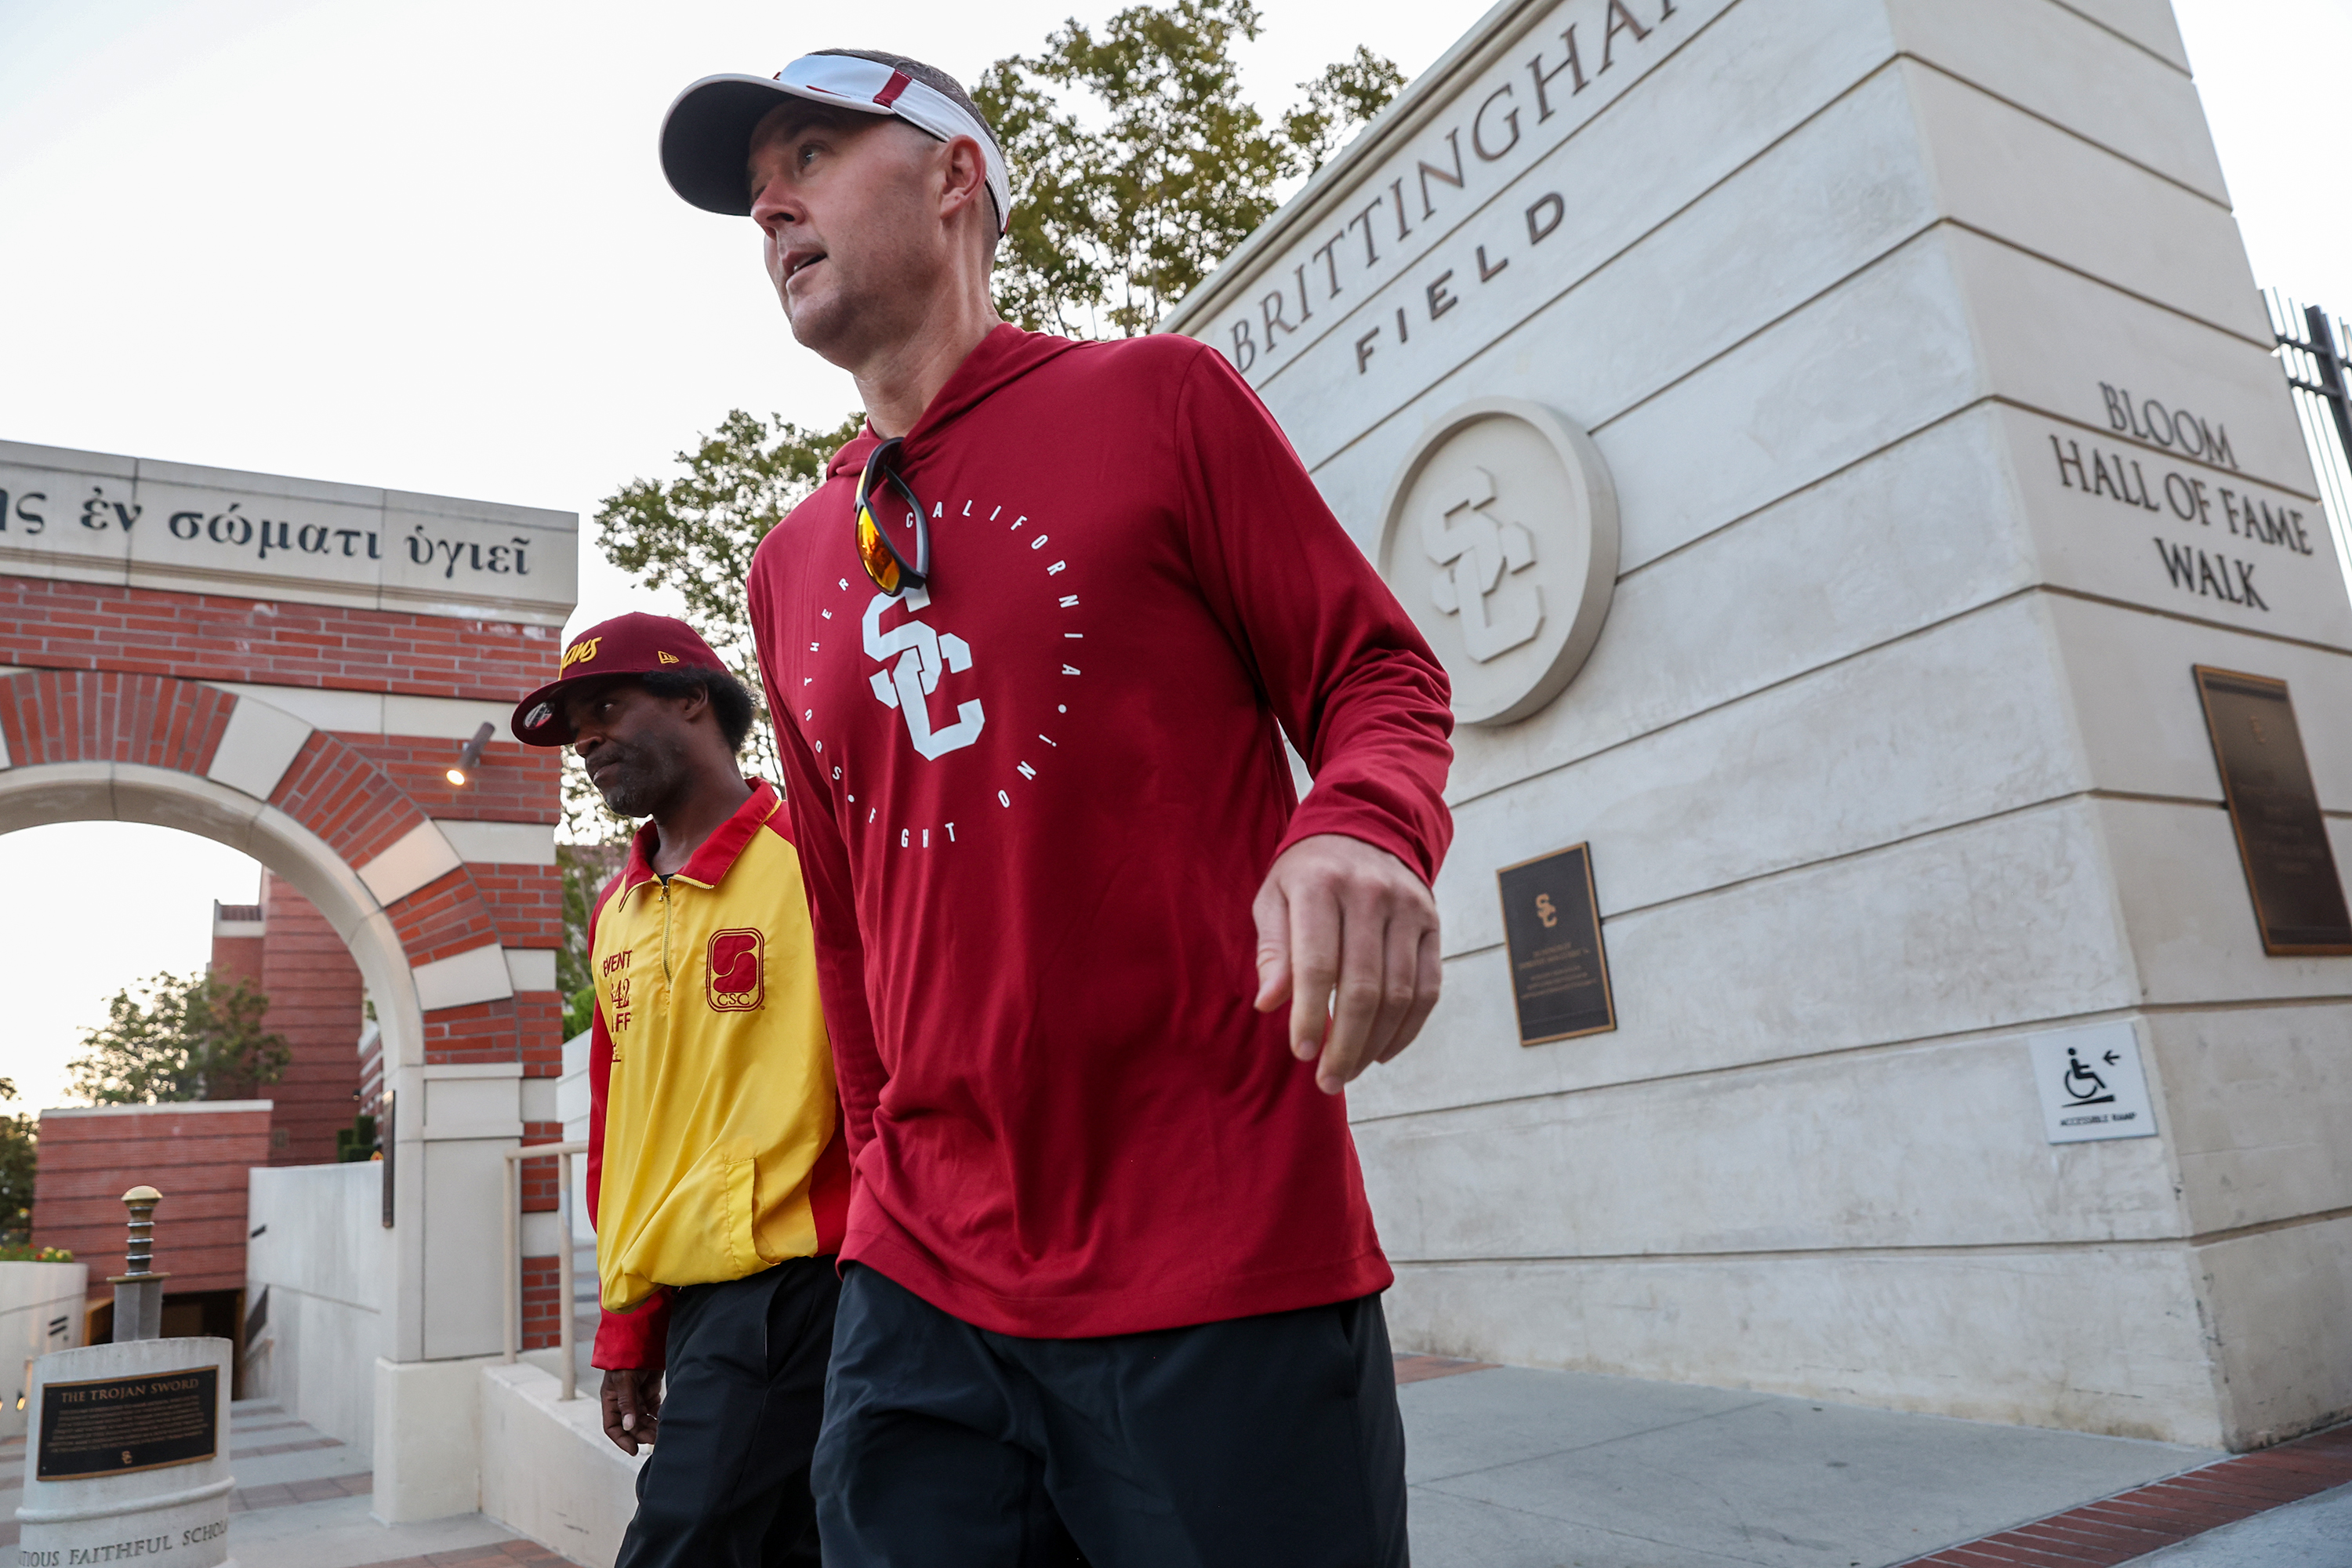 USC Trojans head coach Lincoln Riley on his way to practice at Dedeaux Field.